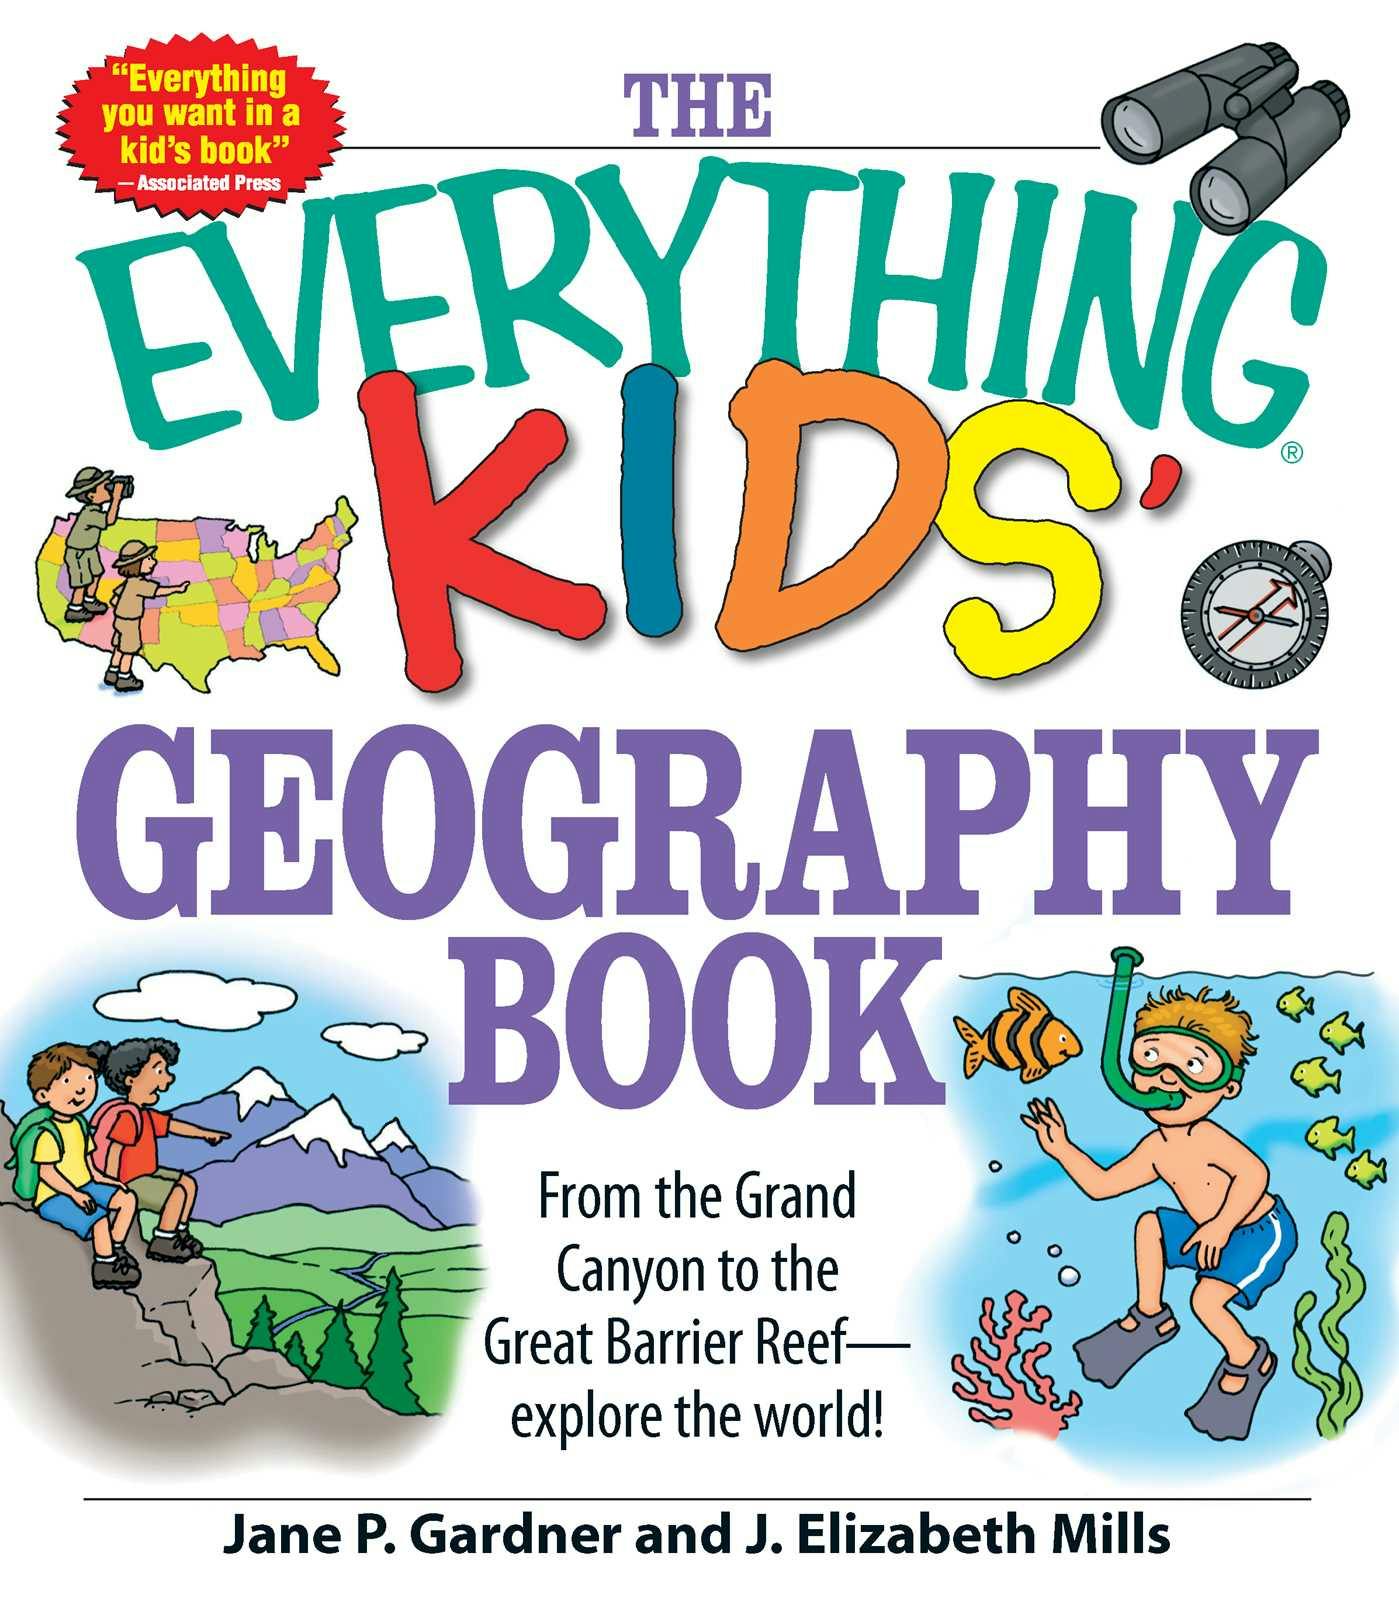 The Everything Kids' Geography Book: From the Grand Canyon to the Great Barrier Reef - explore the world! - Jane P Gardner, J. Elizabeth Mills